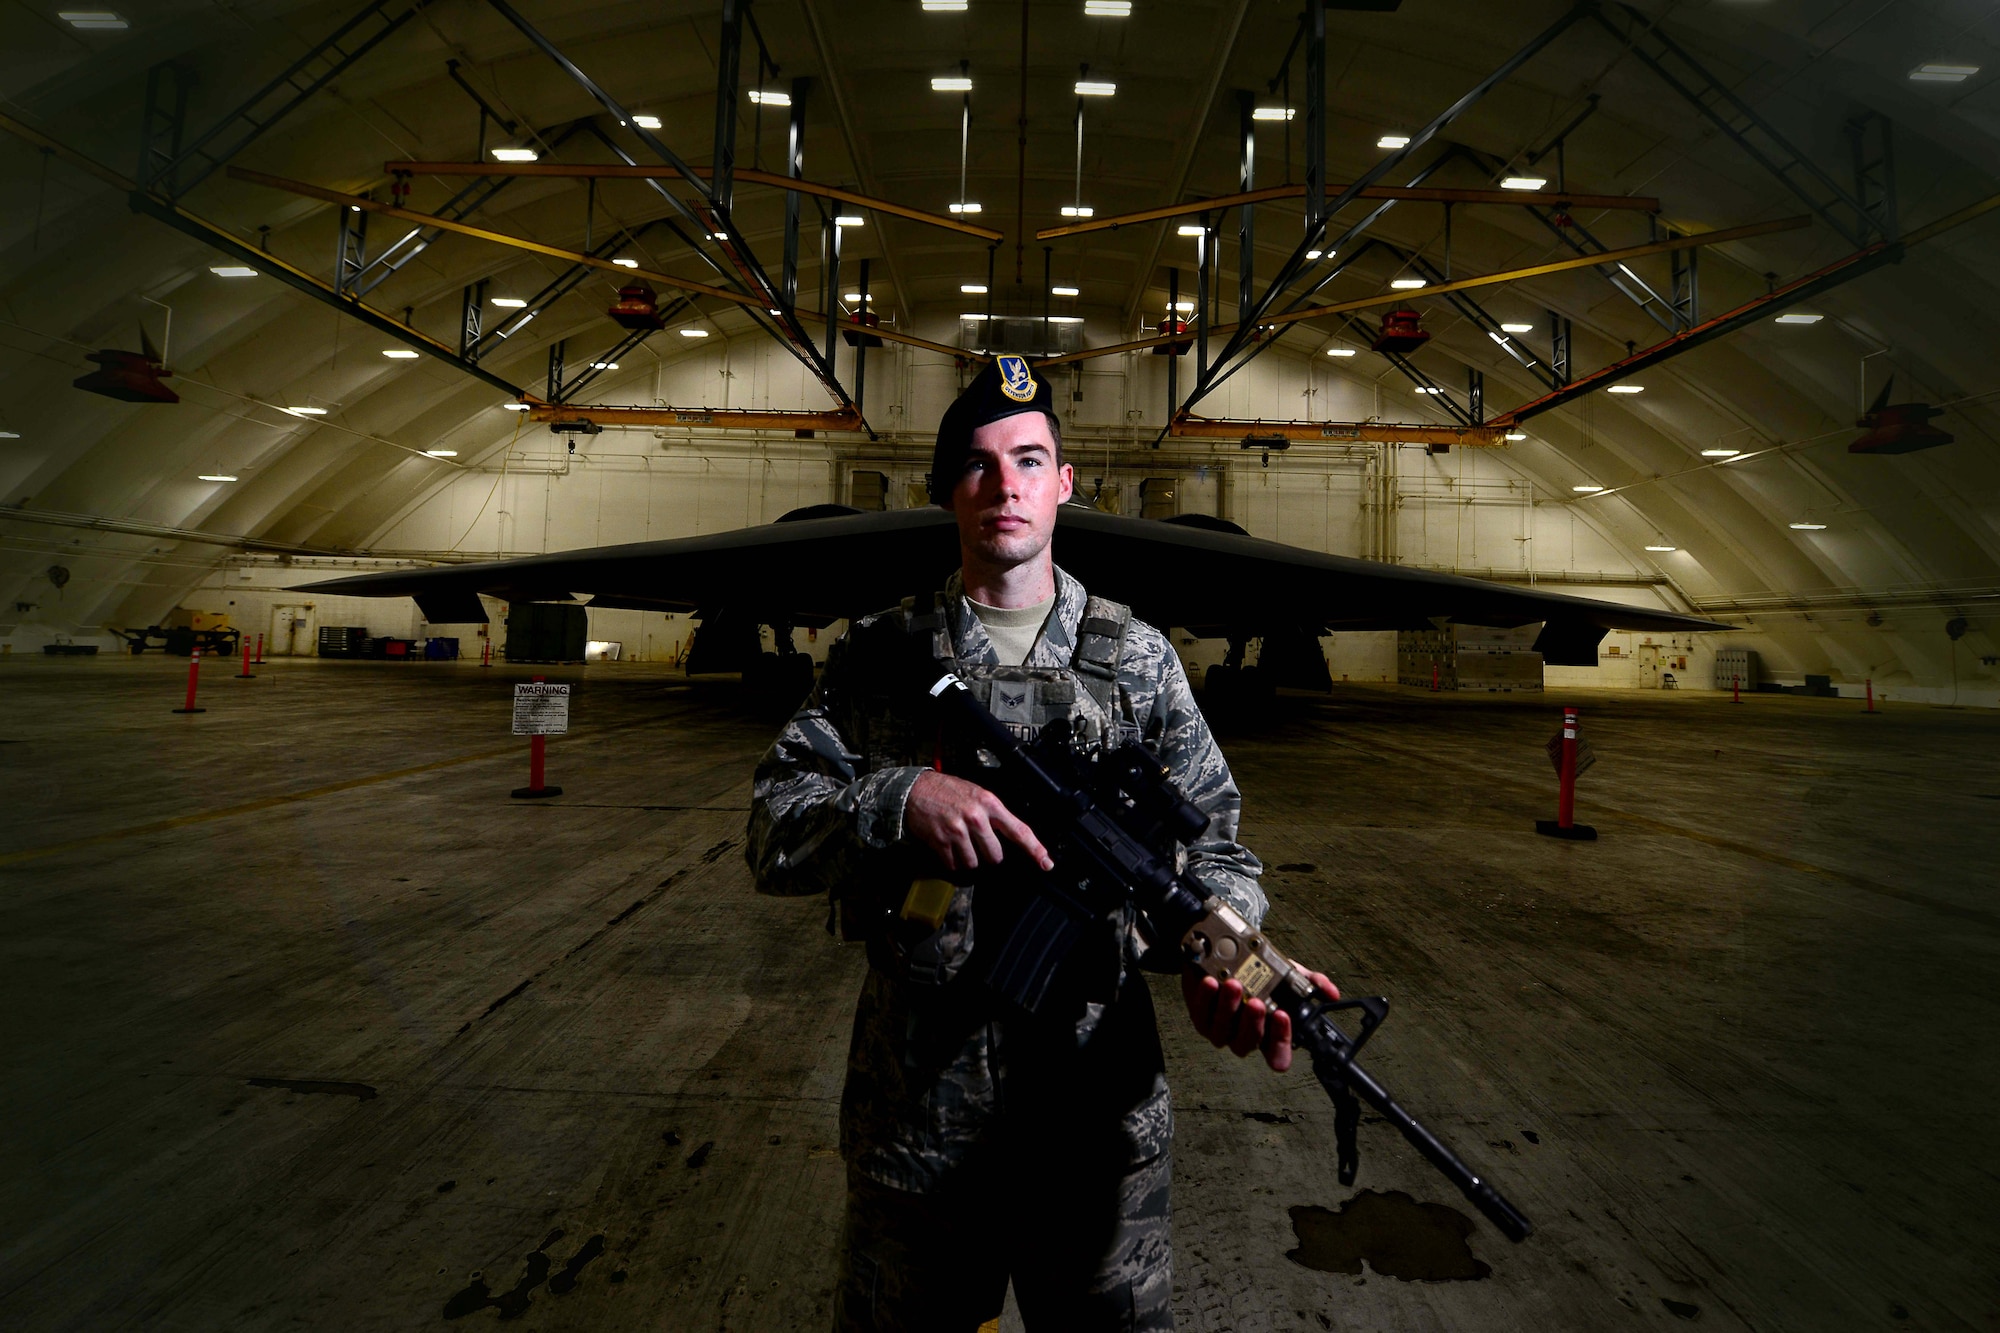 U.S. Air Force Senior Airman Andrew Conlon, a security forces member assigned to the 2nd Security Forces Squadron from Barksdale Air Force Base, La., stands guards at an entry control point Jan. 24, 2017 at Andersen Air Force Base, Guam. Close to 200 Airmen from Whiteman Air Force Base, Mo., and Barksdale Air Force Base, La., deployed to Andersen AFB, in support of U.S. Strategic Command Bomber and Deterrence missions. USSTRATCOM bomber missions familiarize aircrew with airbases and operations in different Geographic Combatant Commands. USSTRATCOM forces are on watch 24 hours a day, seven days a week to deter and detect strategic attack against the United States and our allies. (U.S. Air Force photo by Tech Sgt. Andy M. Kin)